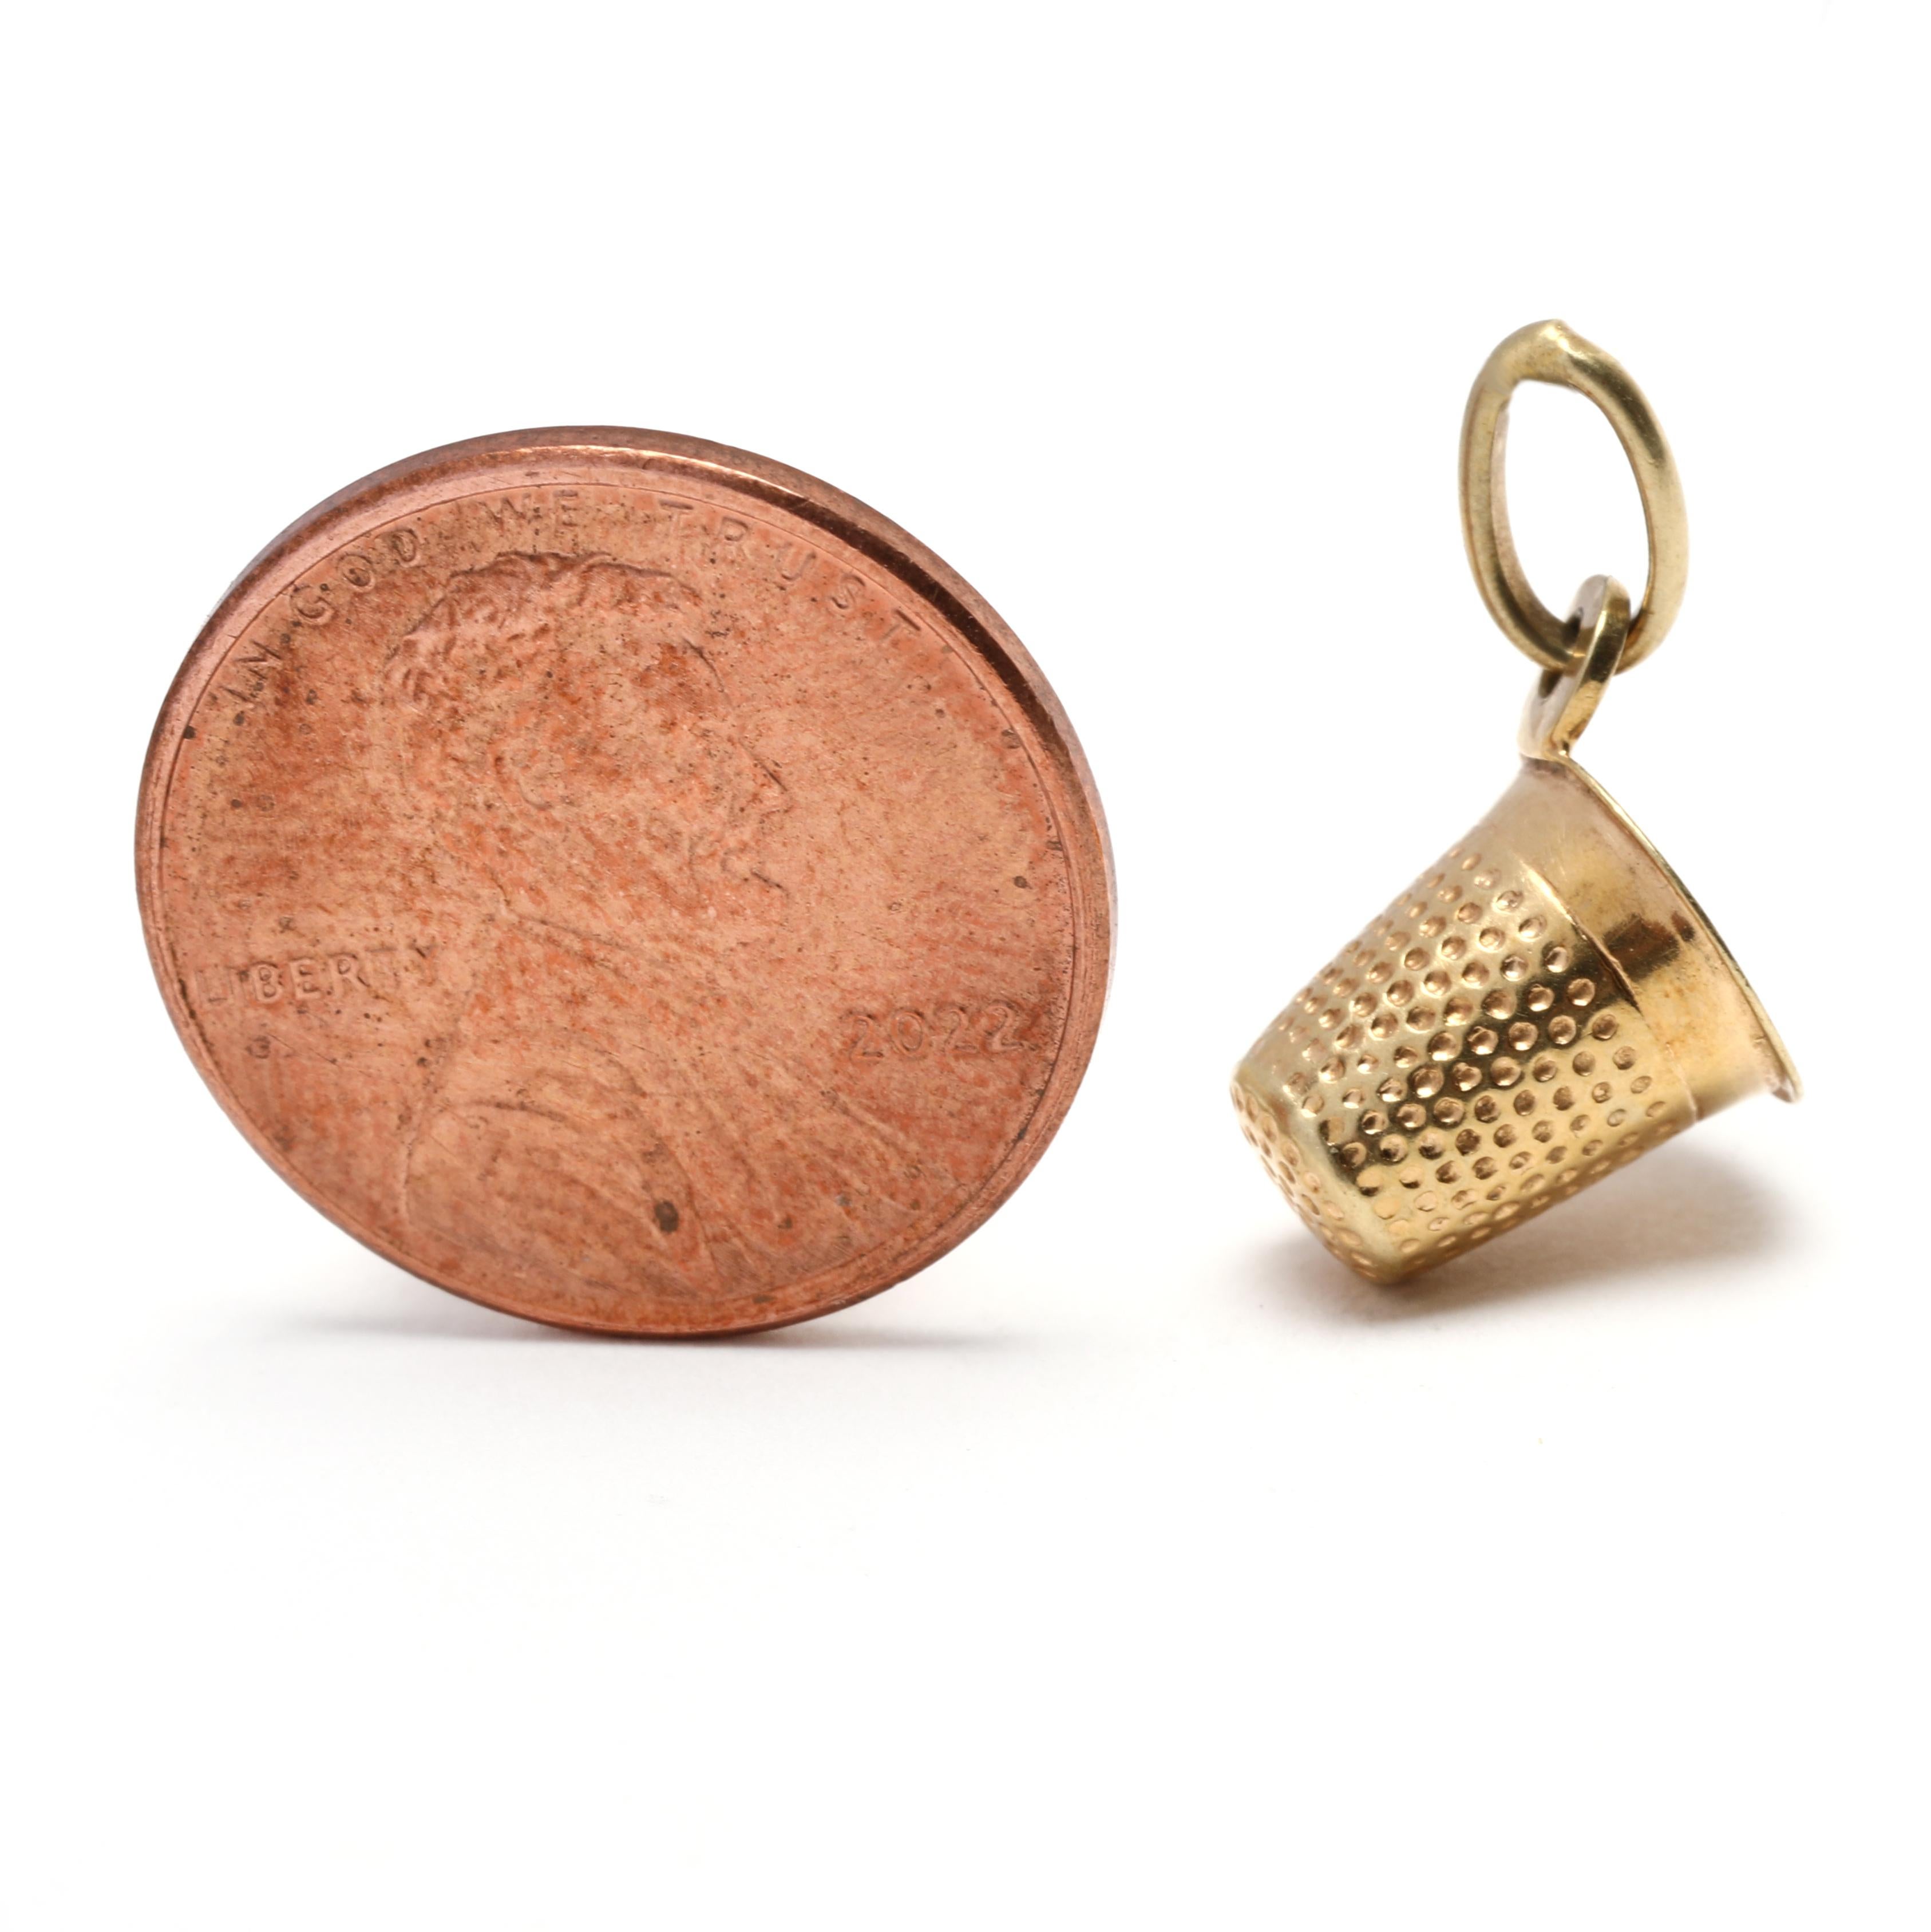 This vintage 14K Yellow Gold Small Thimble Charm is perfect for any jewelry project! Its delicate size measures 1/2 inches long, and its intricate detailing makes it a unique and beautiful piece. Perfect for a charm bracelet, necklace, or other